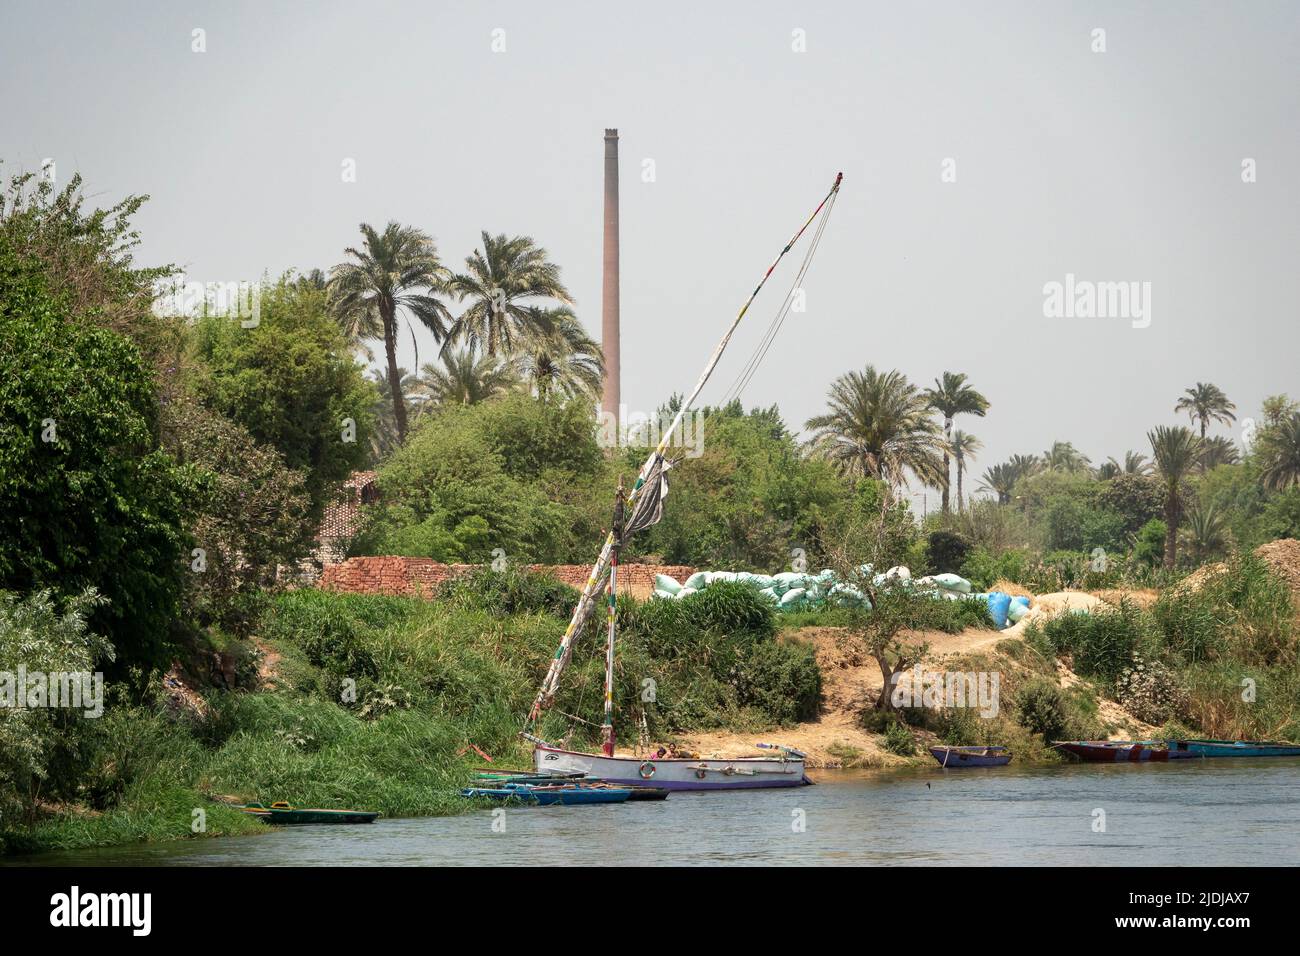 A traditional felucca with several small boats moored in the reeds on the banks of the river Nile with brickworks and chimney in the background Stock Photo